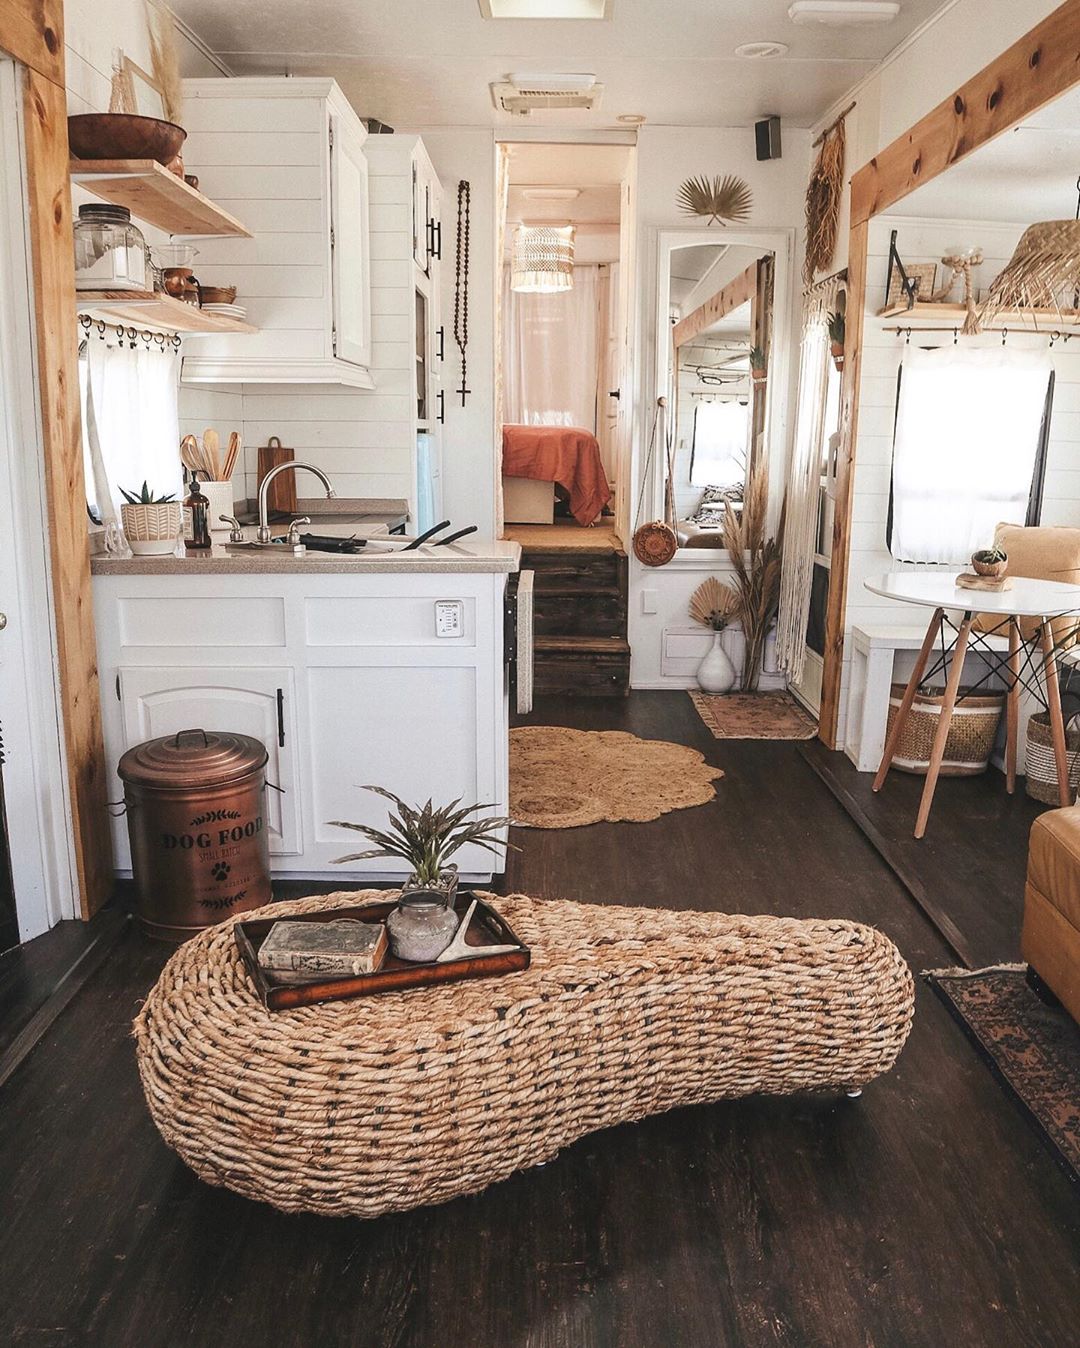 Tiny home with white walls and wicker coffee table. Photo by Instagram user @shelbyadrift